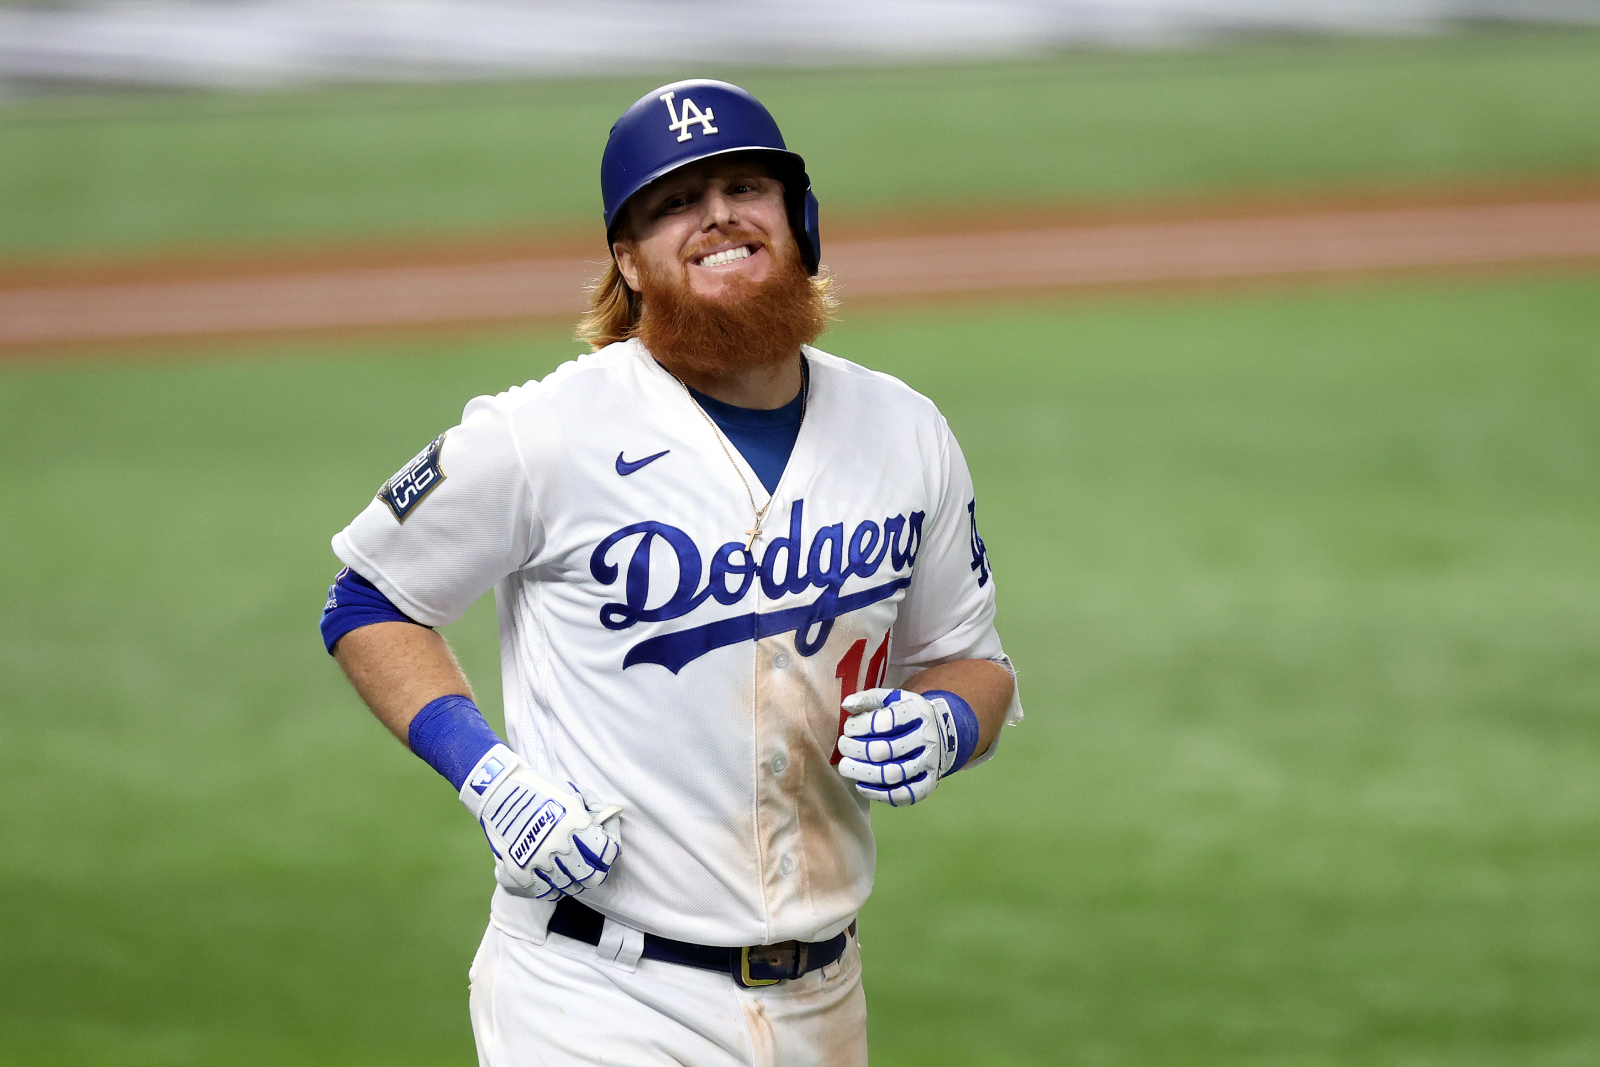 Justin Turner has been a very talented hitter for the LA Dodgers throughout his career. So, how much is Turner's net worth?